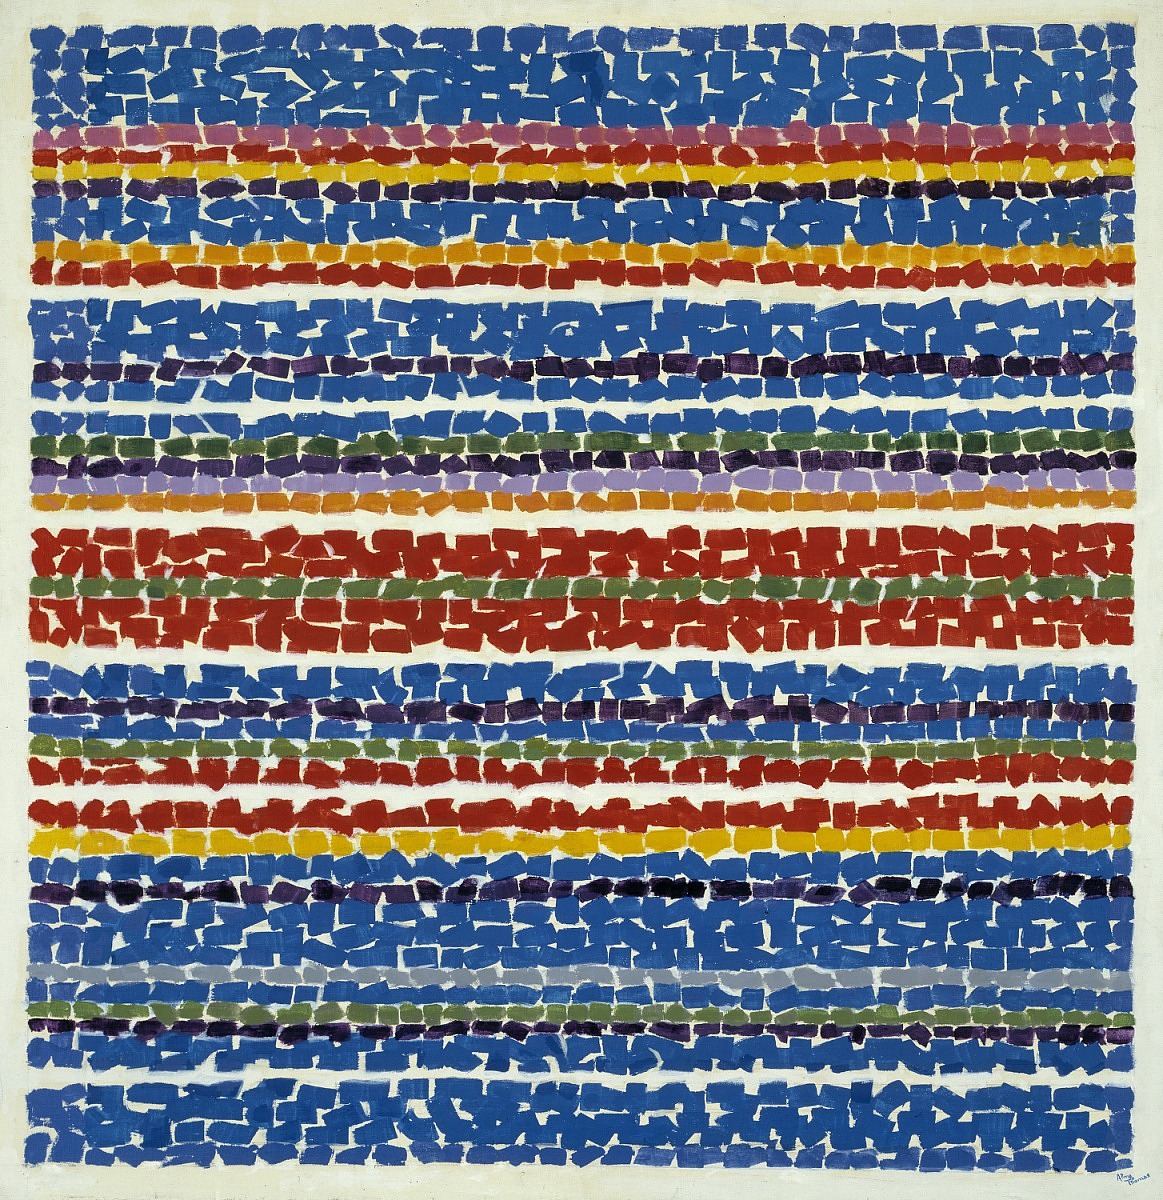 Light Blue Nursery. Image showing rows of blue, red, yellow, green, and purple paint splotches, like quadrilaterals, stretching horizontally on canvas, by Alma Thomas.